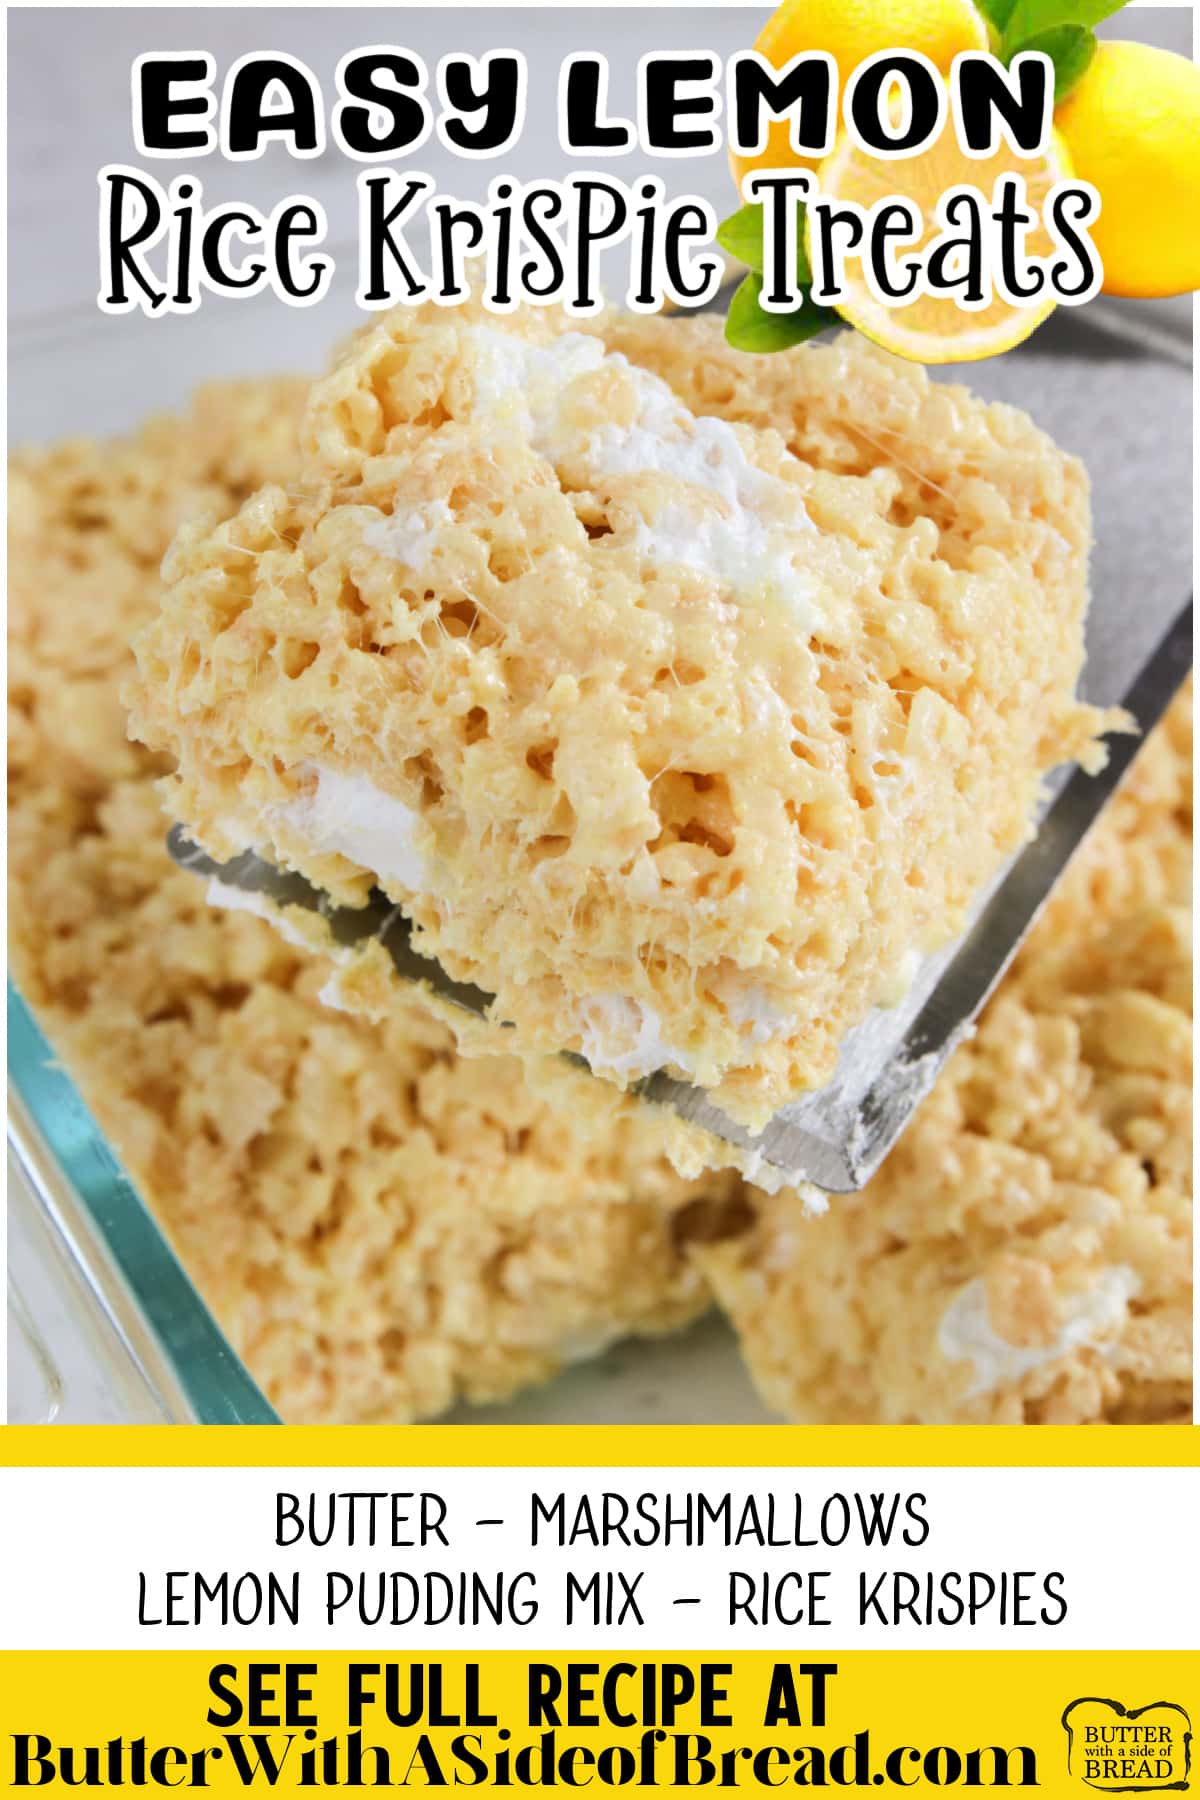 Lemon Rice Krispie Treats take classic rice krispie treats to another level by adding lemon pudding mix. Only 4 ingredients needed to make this delicious lemon dessert! 